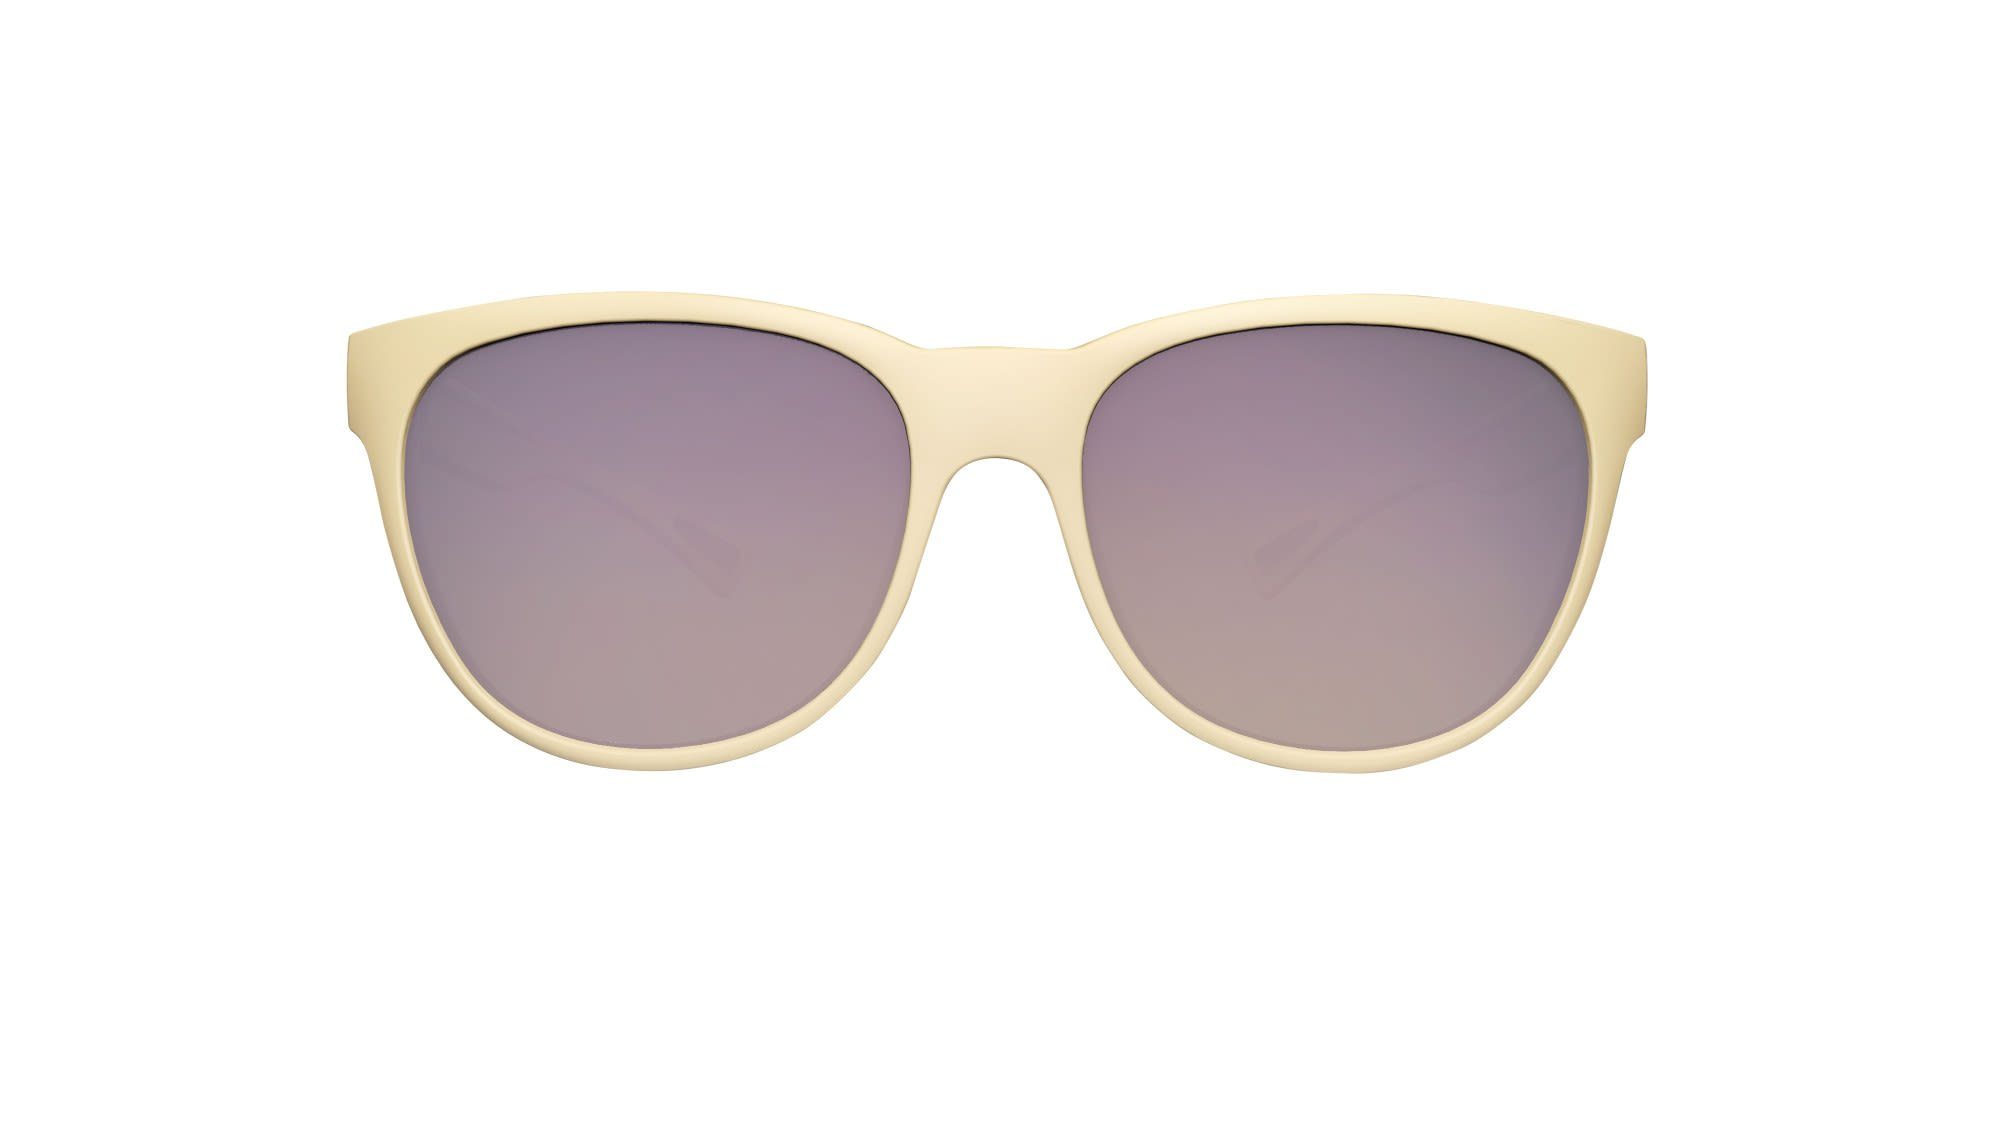 Kask Sonnenbrille Koo Cosmo - Accessoires Mirror Super Blush Pink